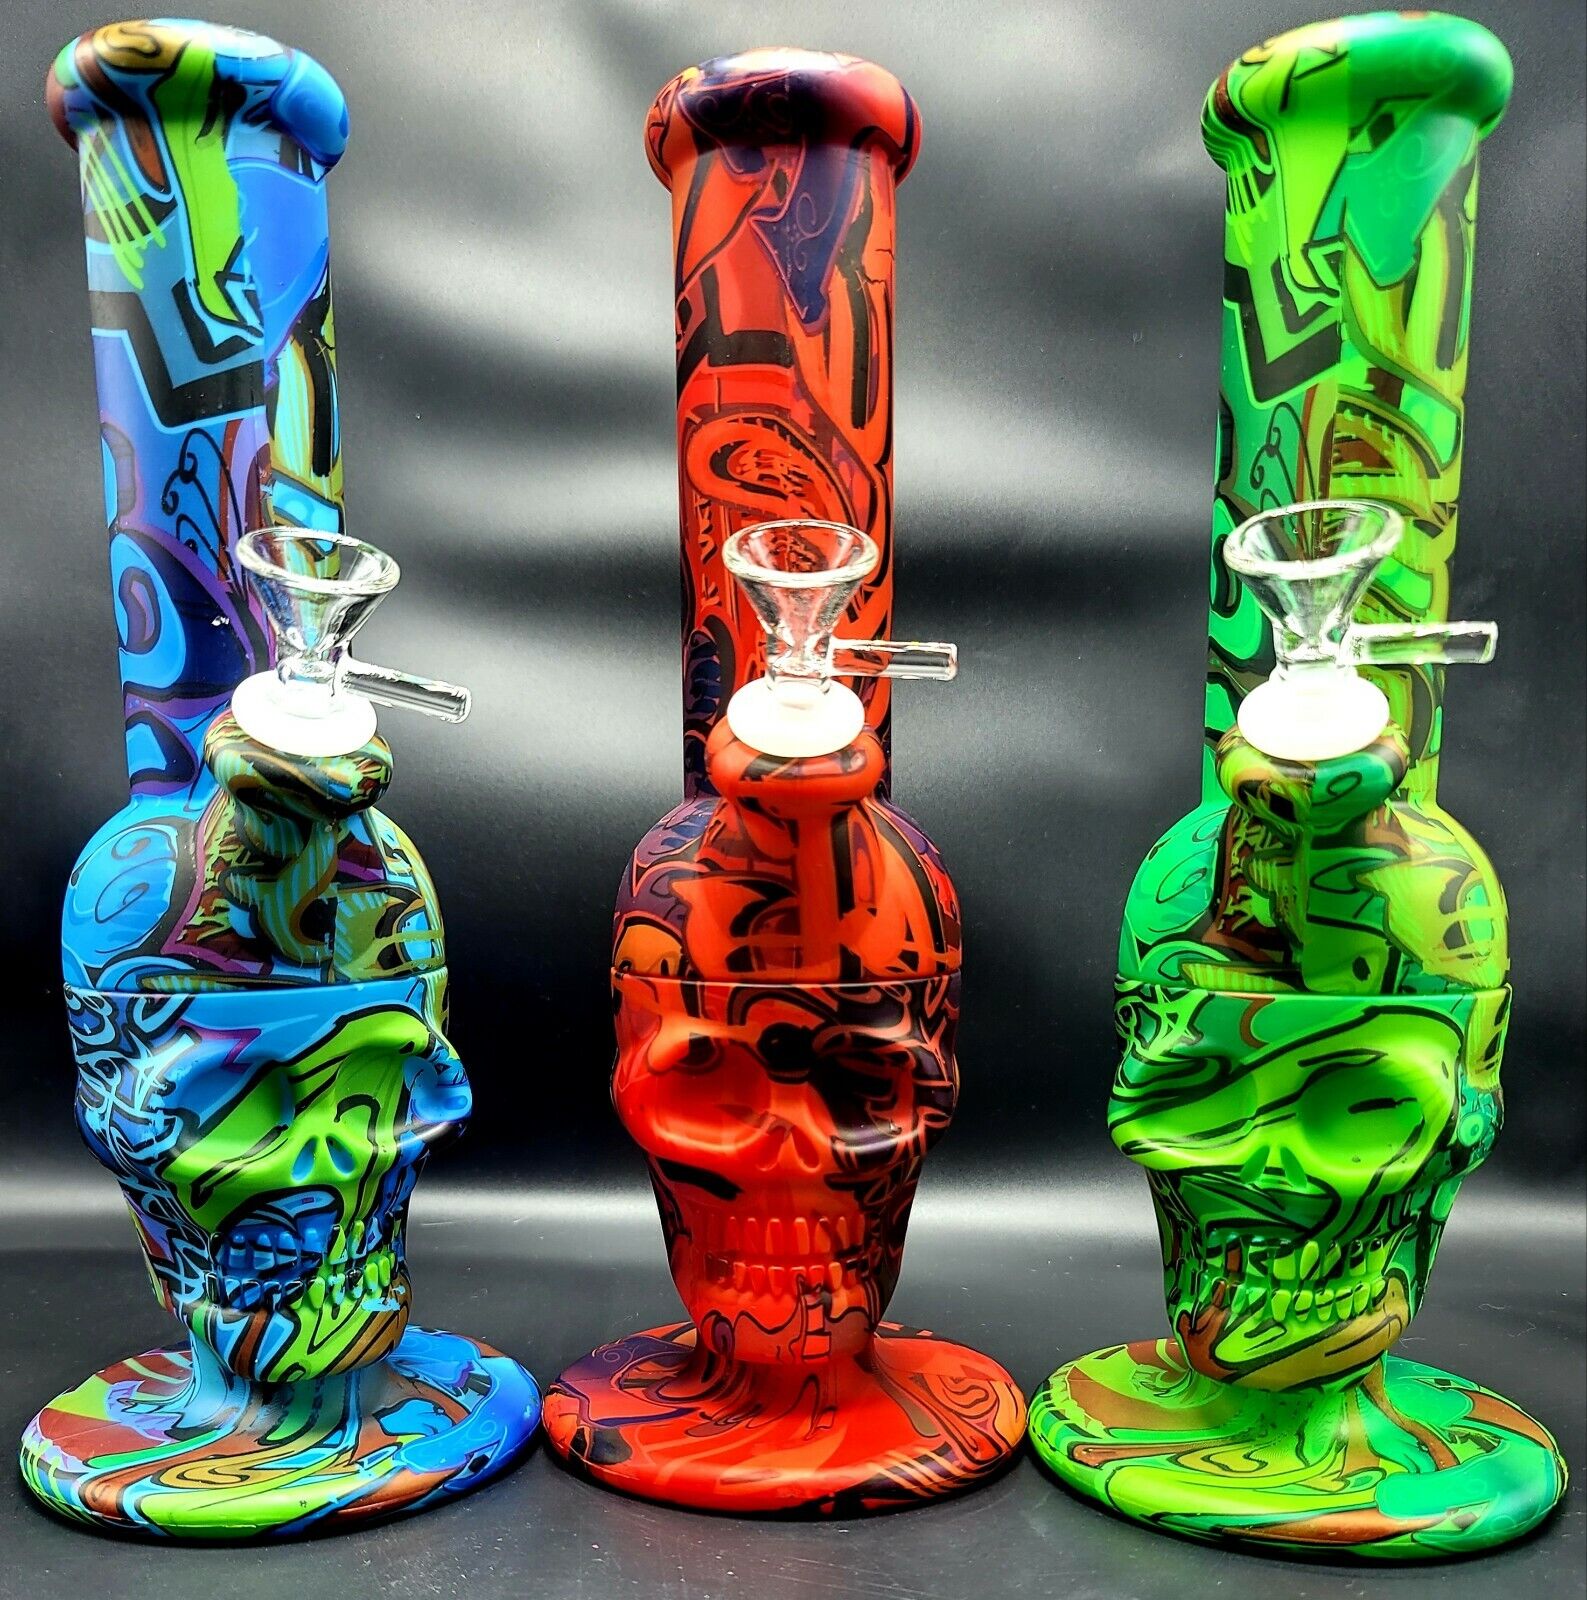 11 Inch 4 PIECE Unbreakable Silicone Skull Bong Detachable Water Pipe + SCREENS